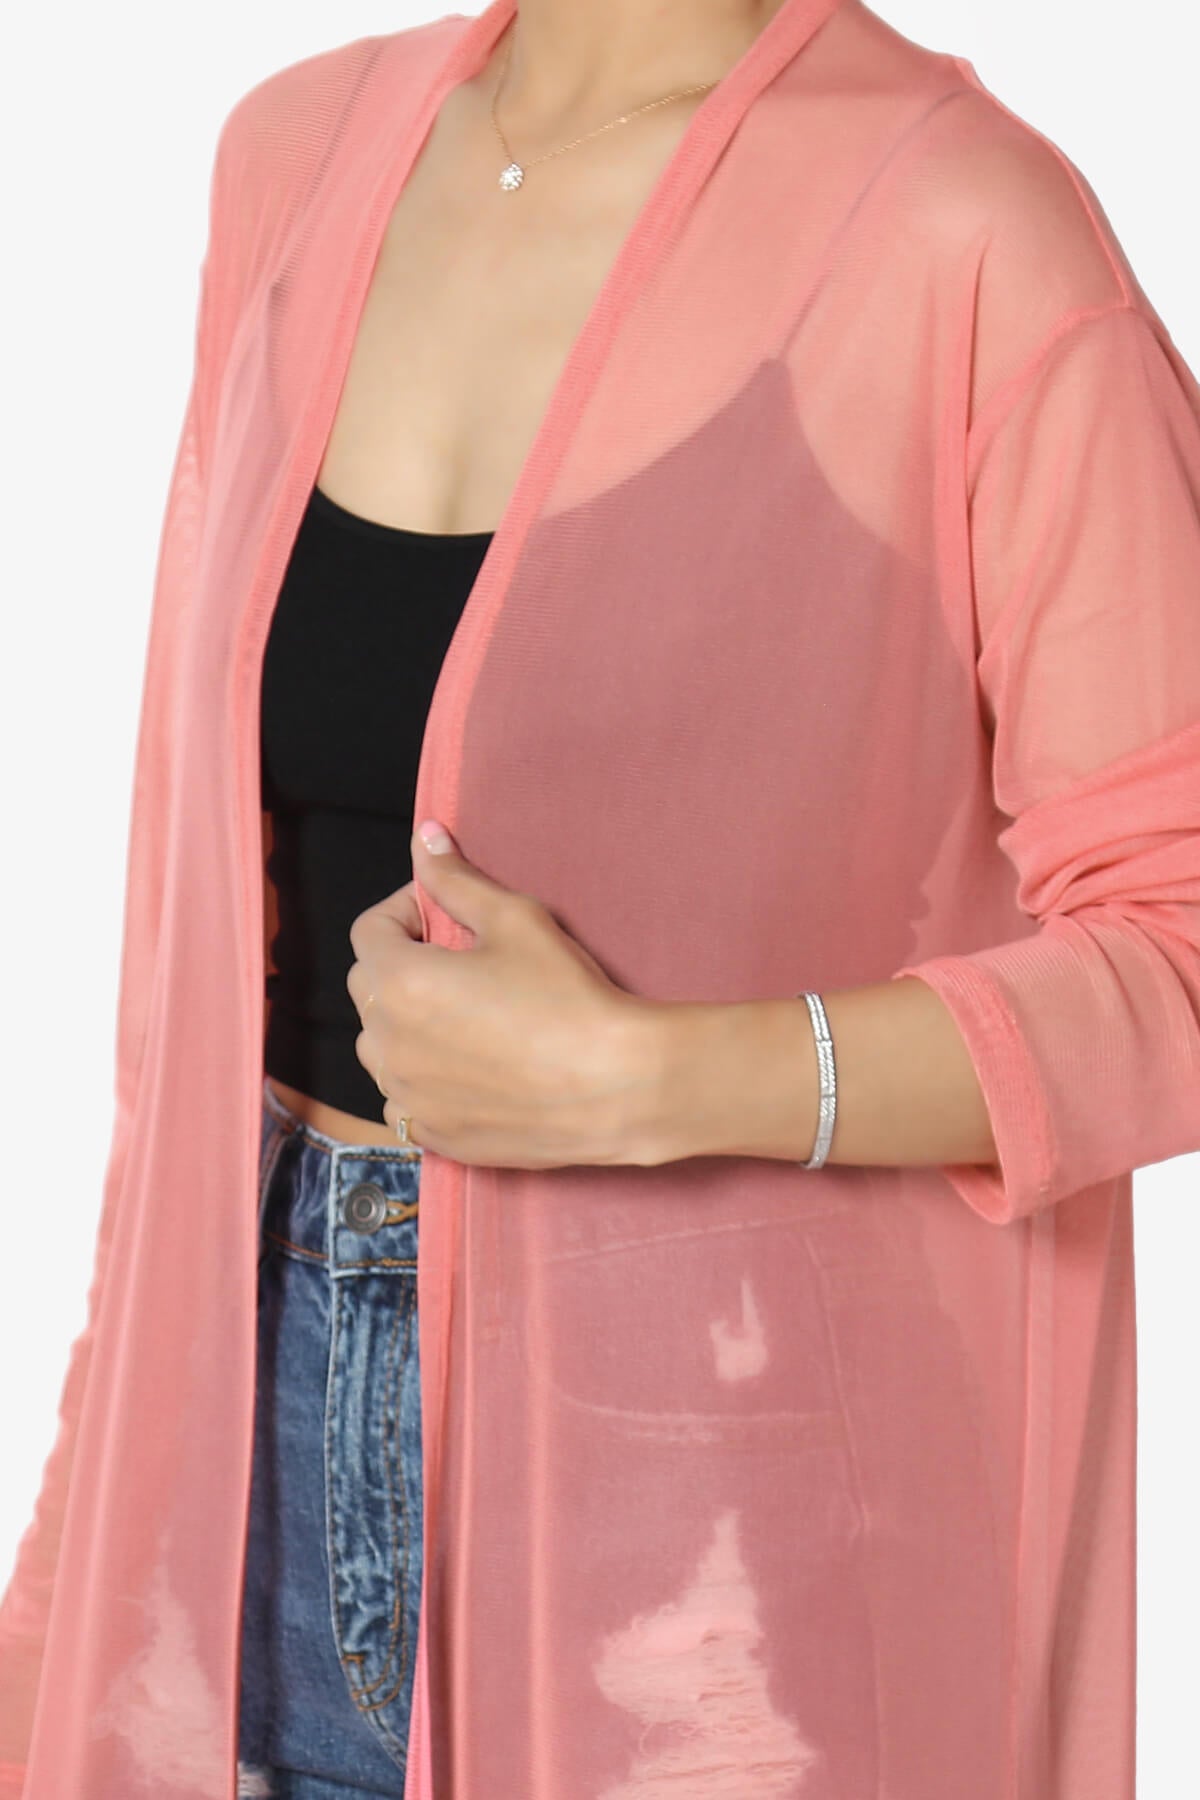 Moxxi Sheer Mesh Open Cardigan Duster CORAL_5